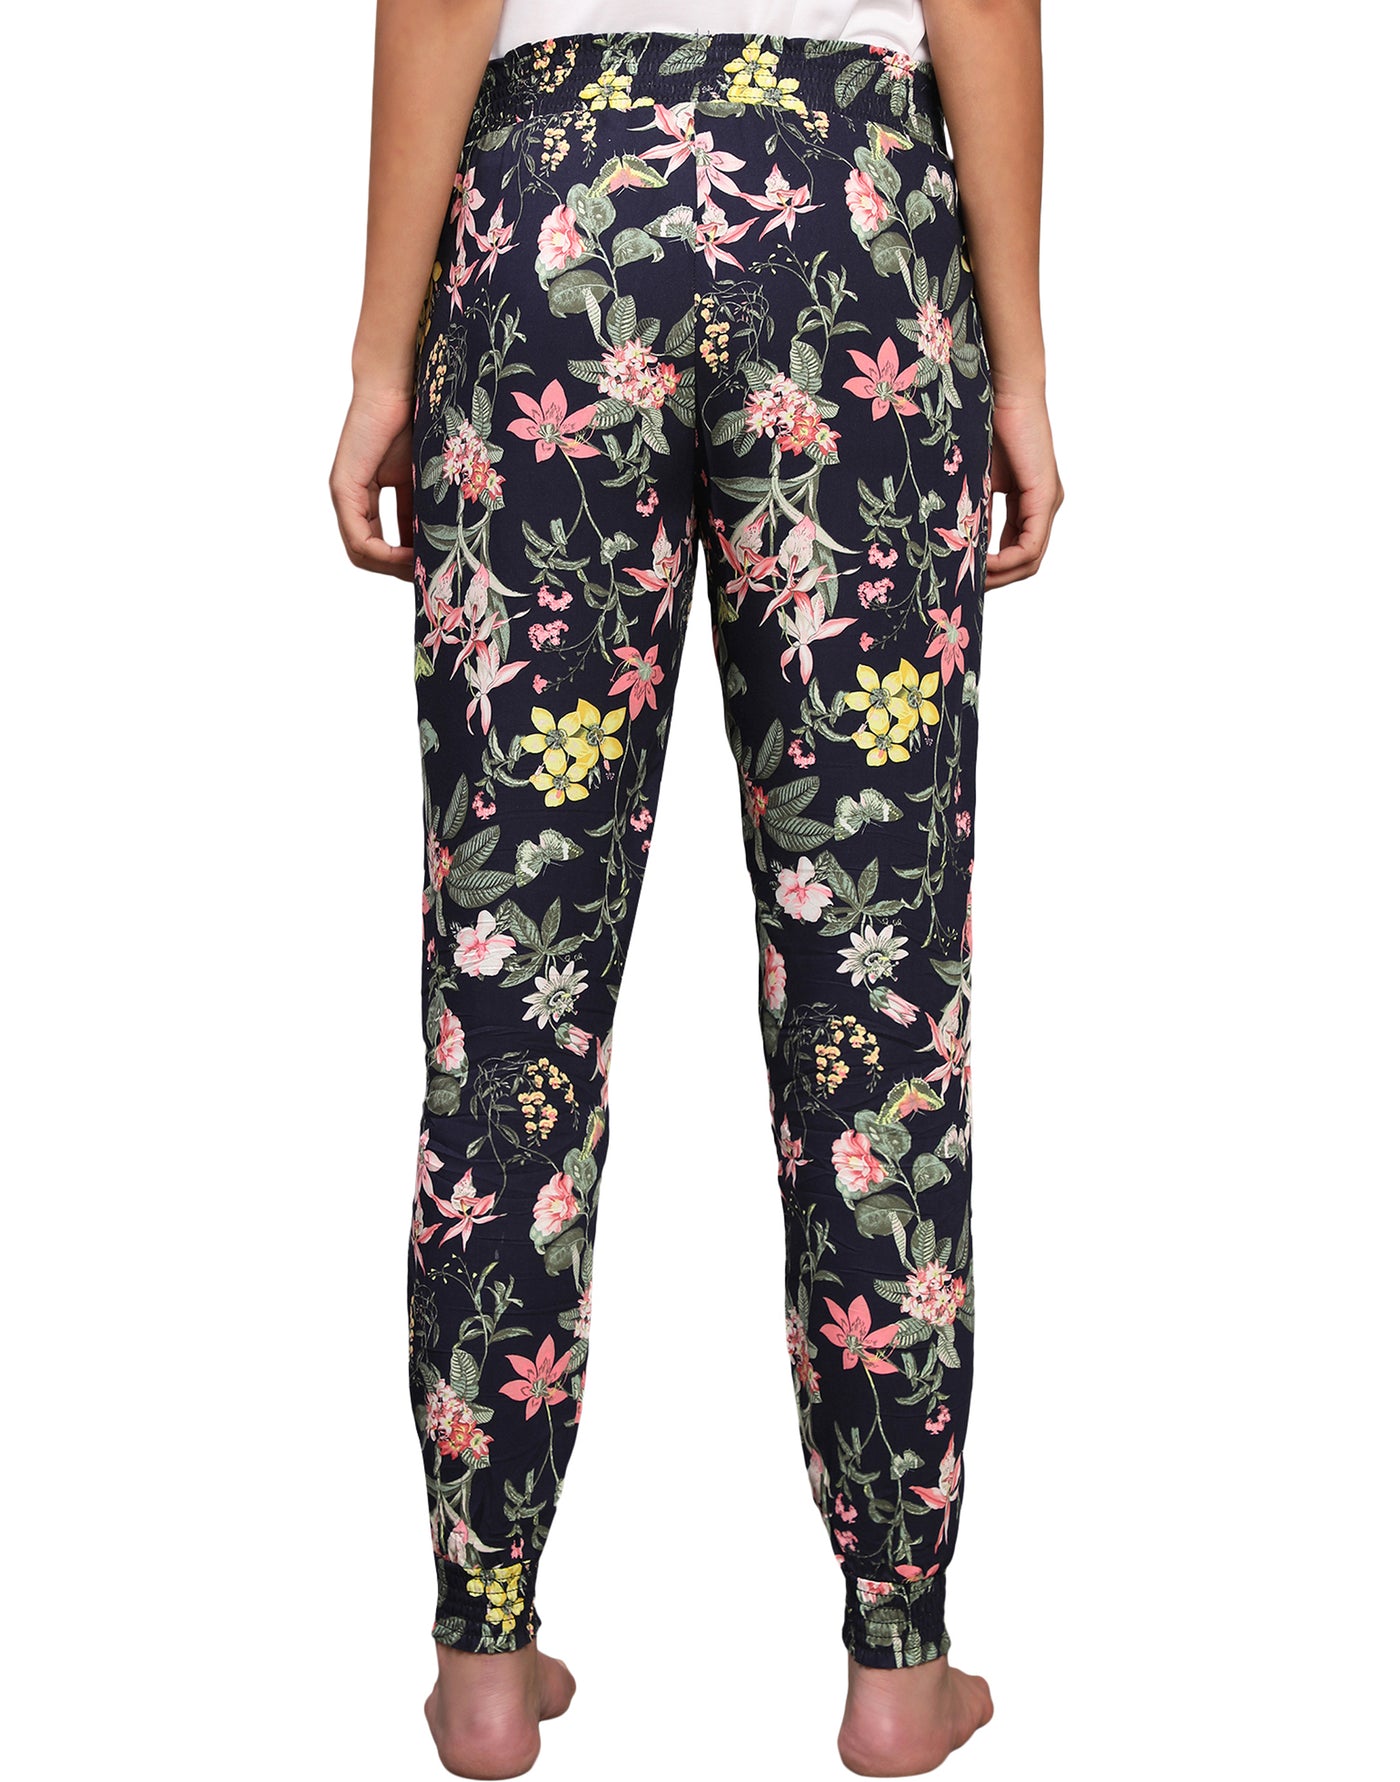 Lounge Pant for Women-Navy Garden Butterfly Print Smocking Pant